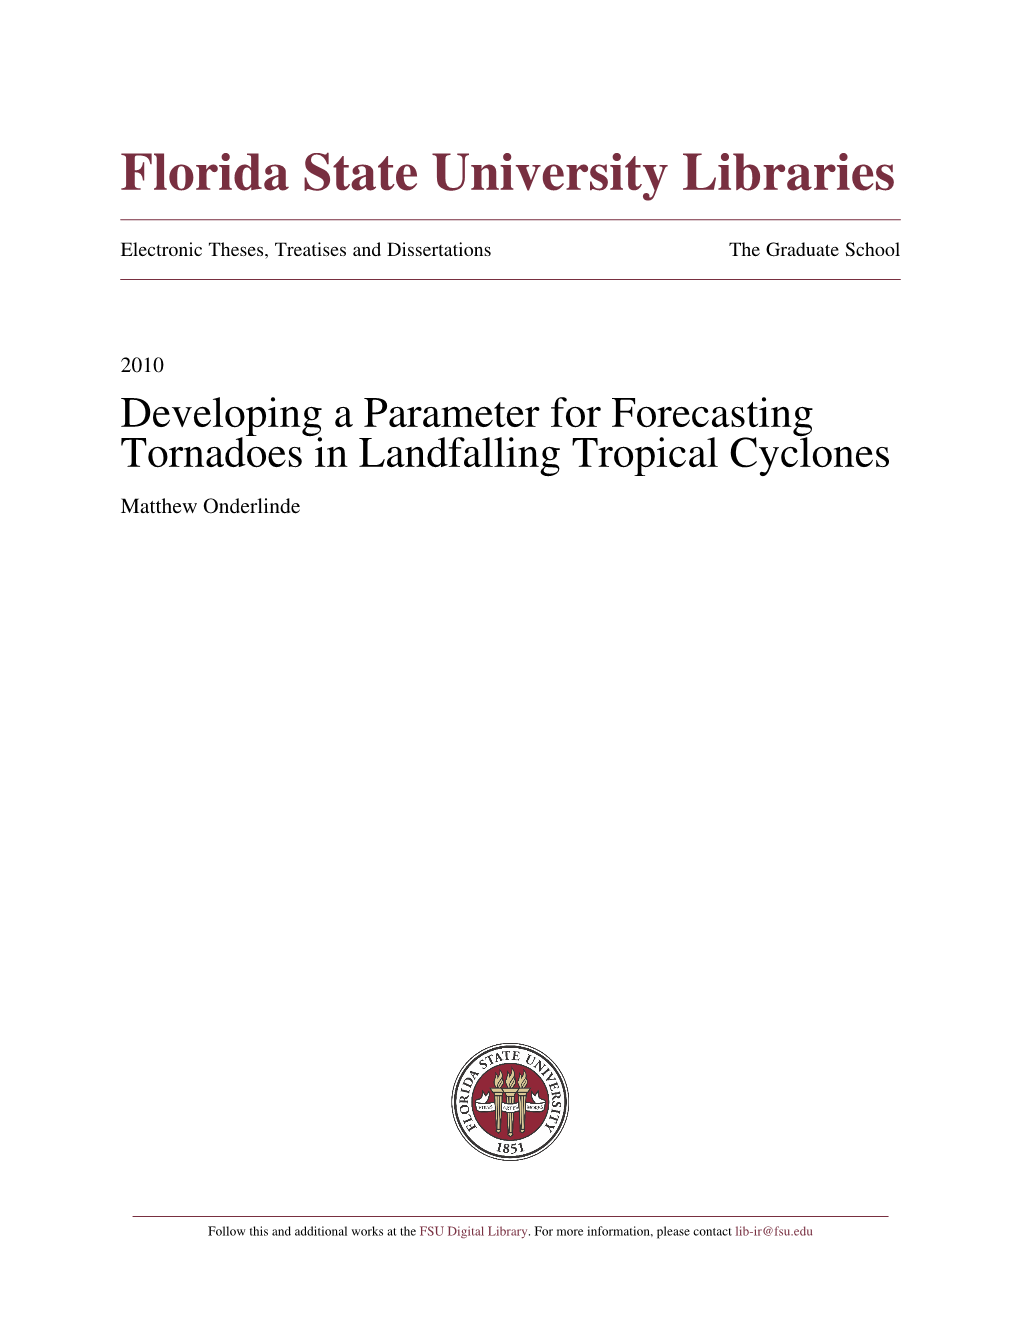 Developing a Parameter for Forecasting Tornadoes in Landfalling Tropical Cyclones Matthew Onderlinde